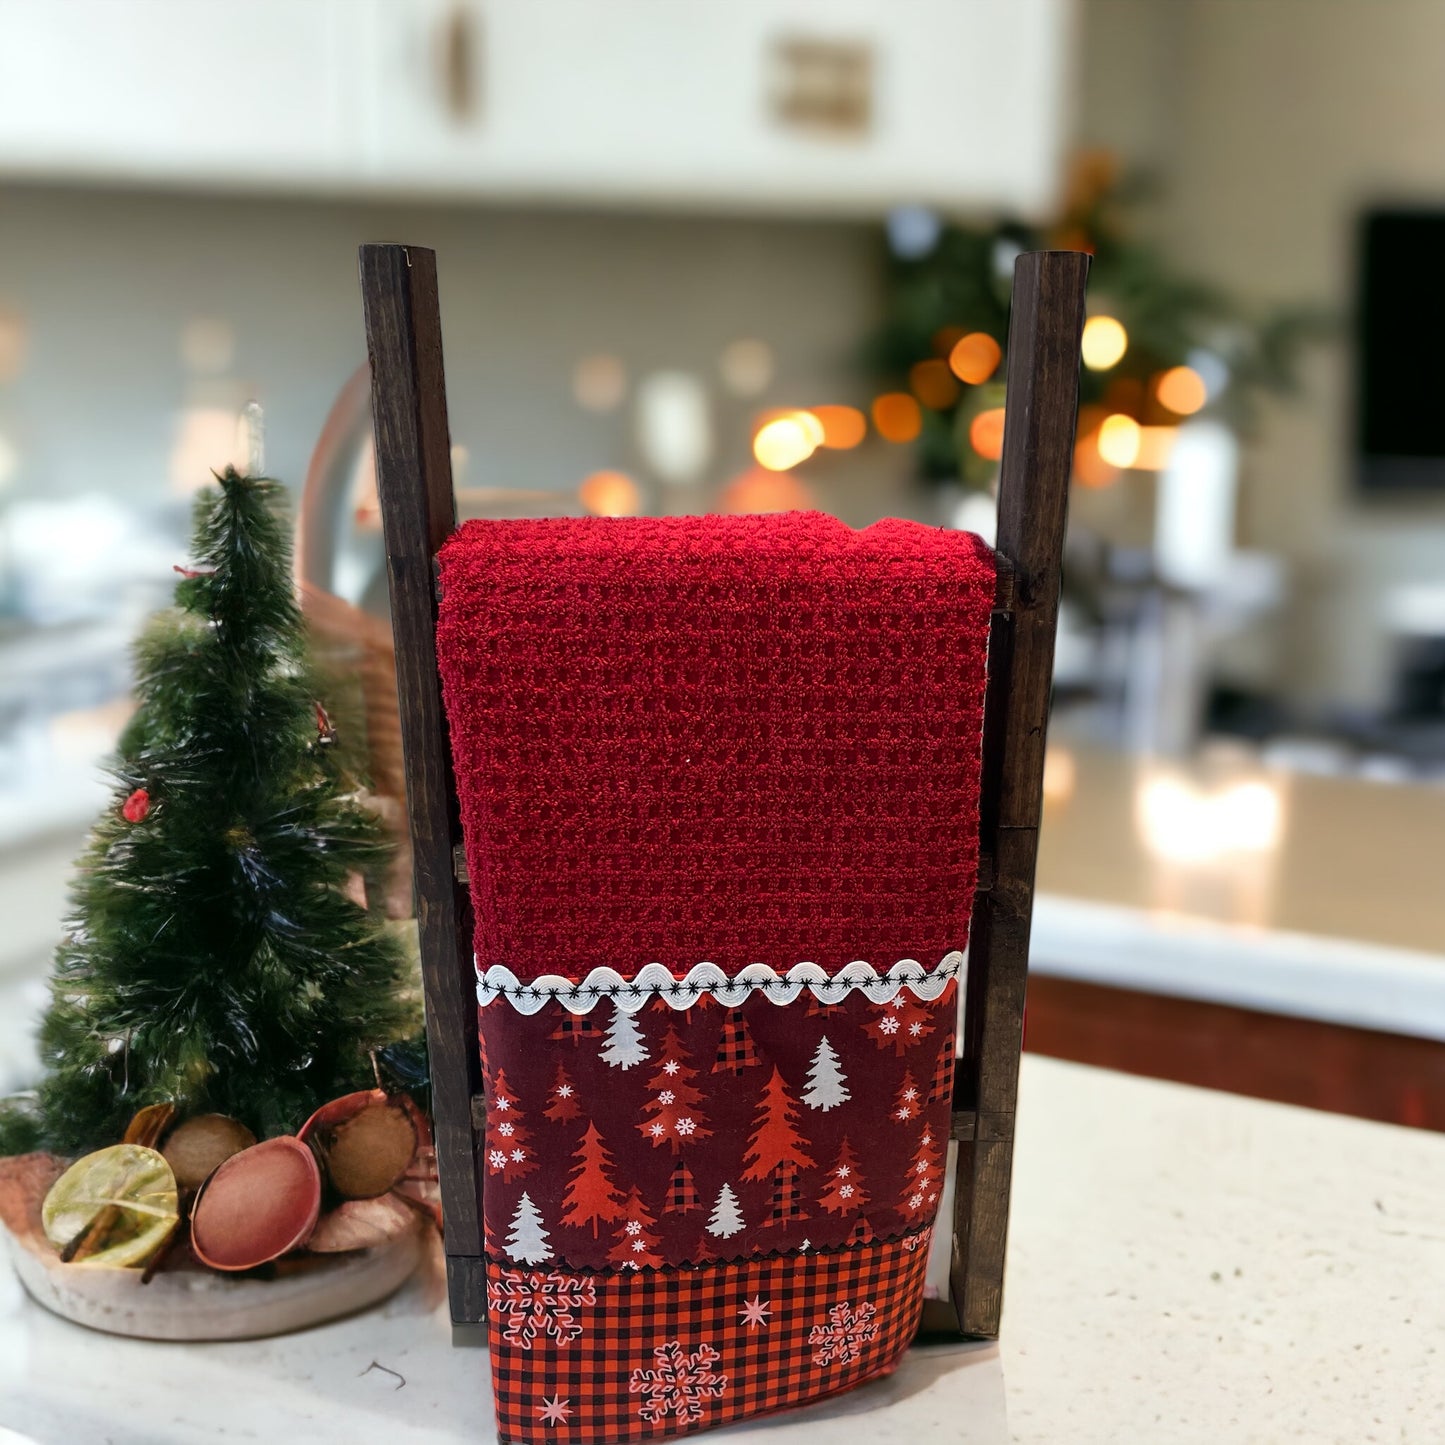 Christmas Kitchen Dish Towel With Red and White Gingham Cotton Accents